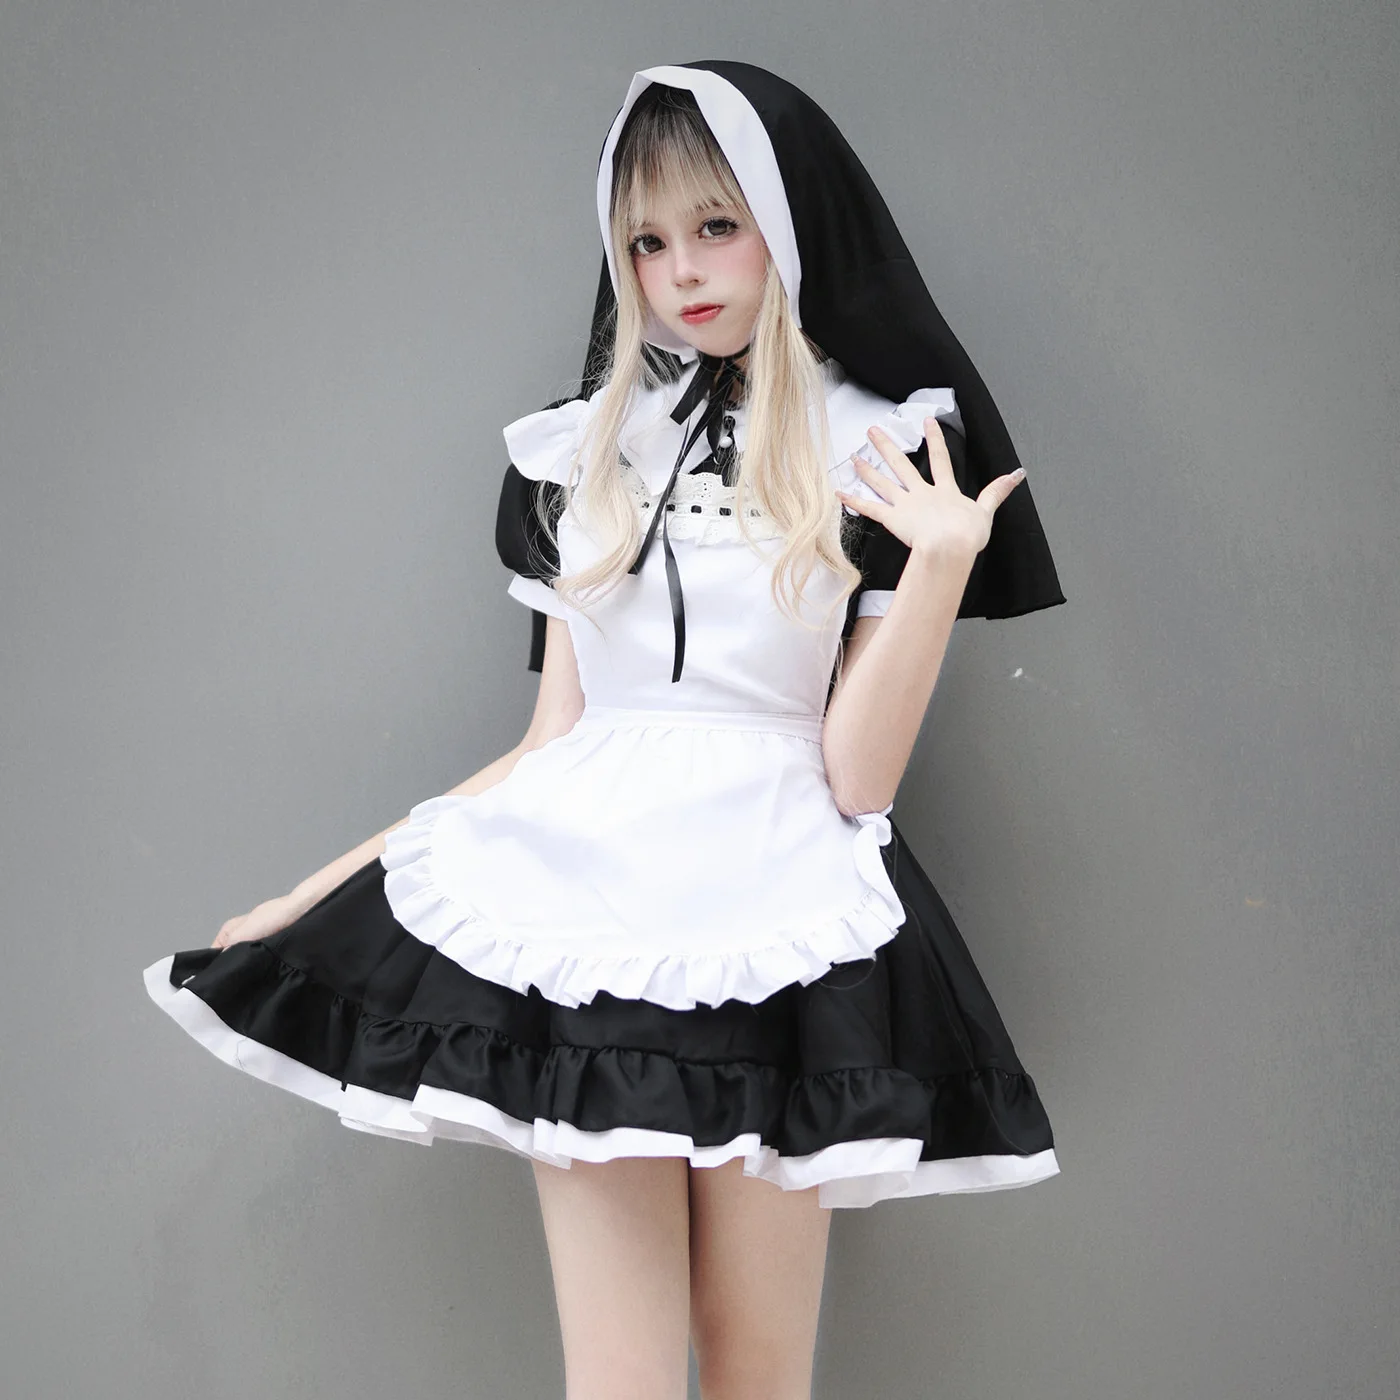 New Black Lolita Nun Maid Dress Costumes Cosplay Nun Girl Maid Dress Suit for Waitress Maid Party Stage Costumes S -5XL photo